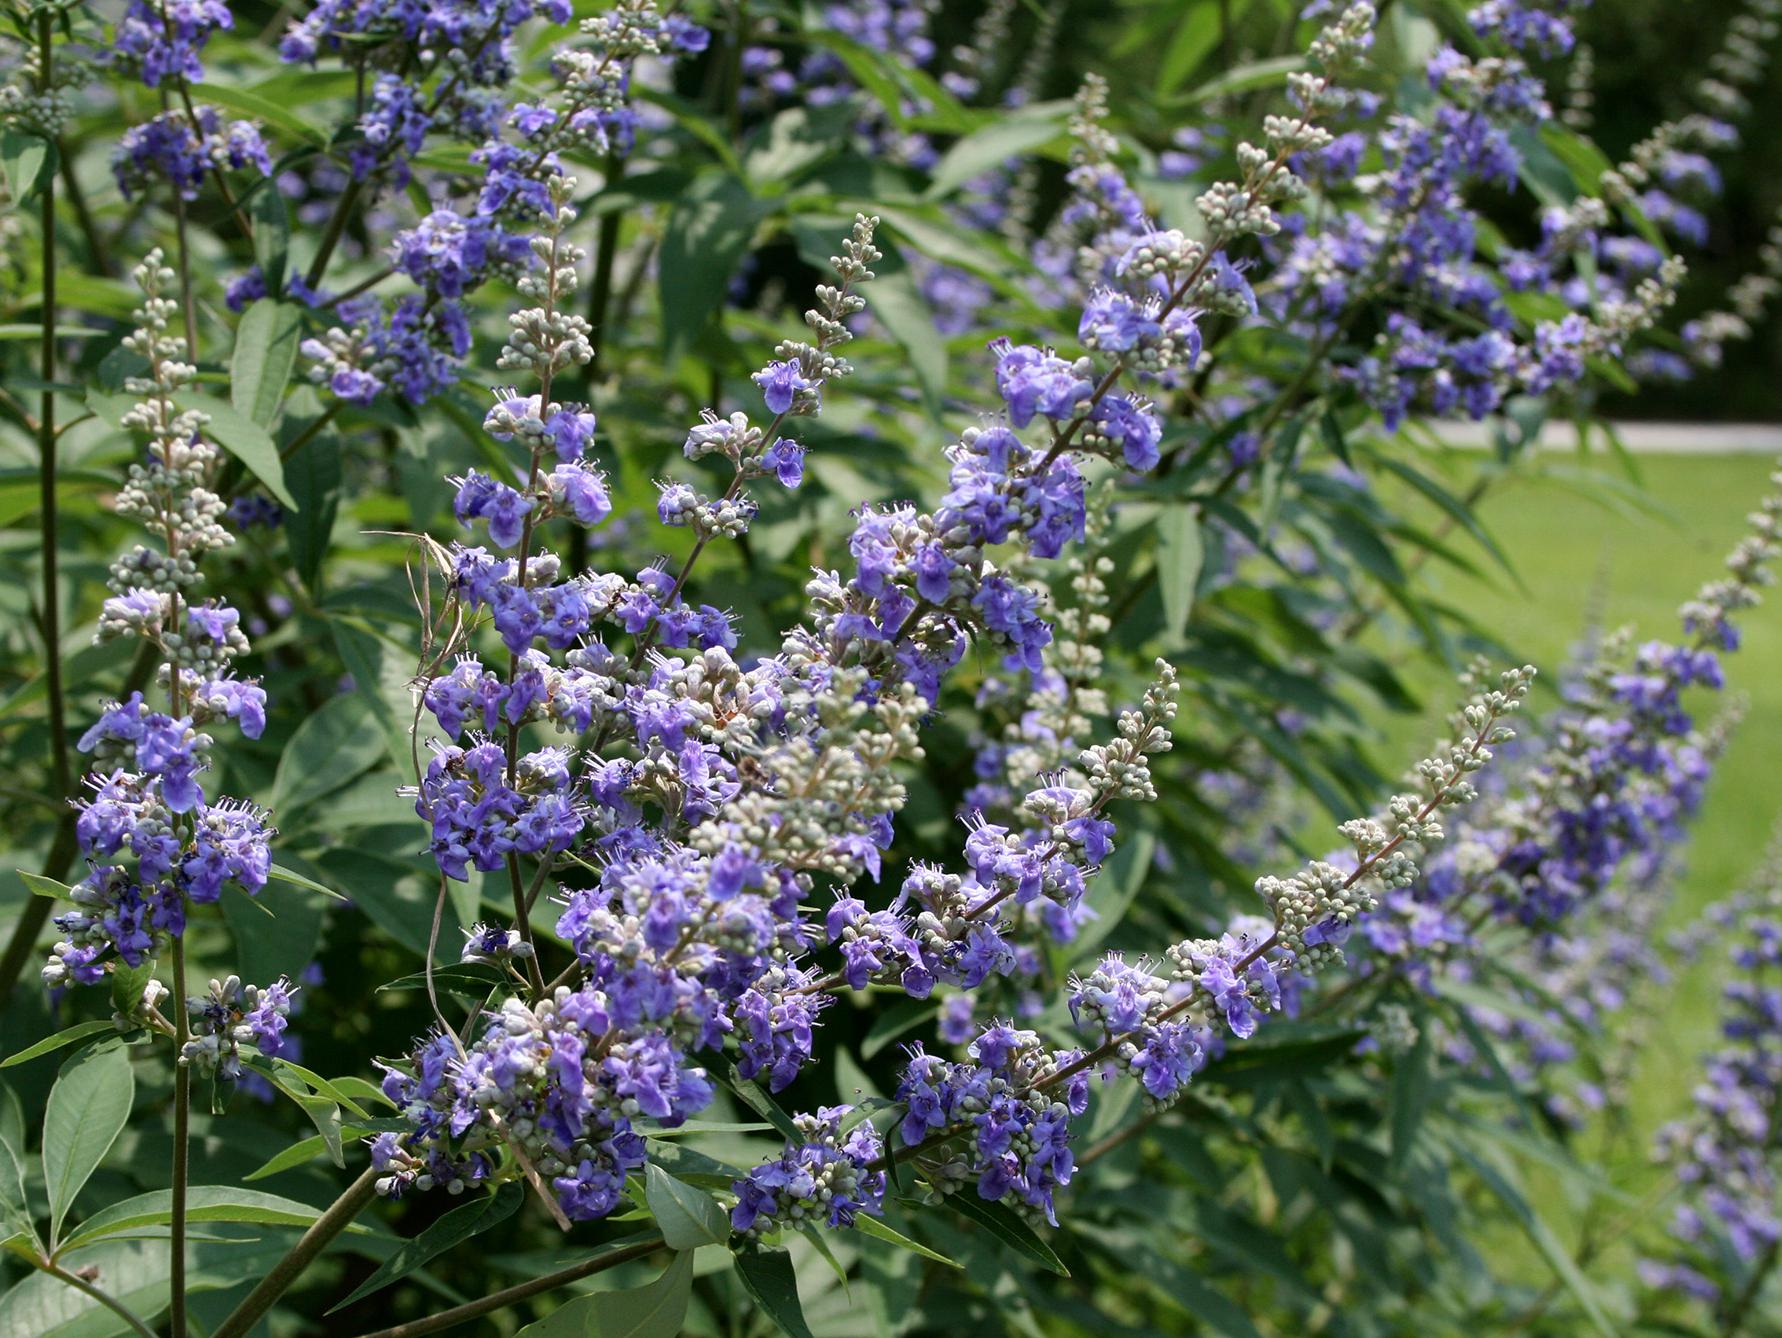 Spikes covered with small purple flowers extend from a green bush.